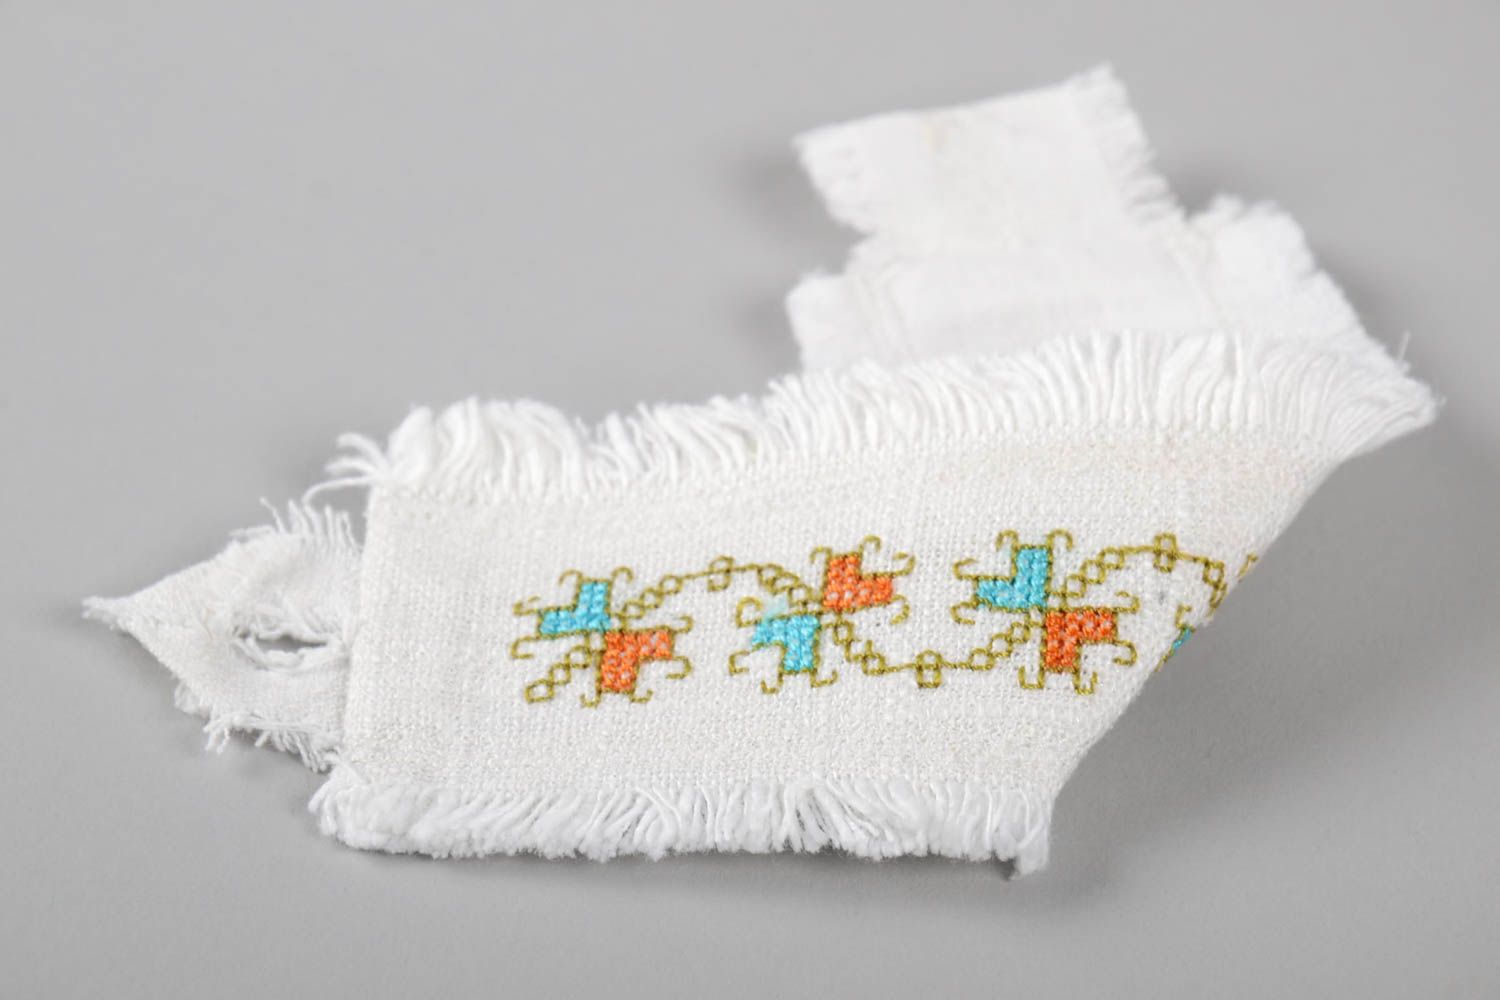 Handmade bracelet with embroidery wide bracelet in ethnic style designer jewelry photo 5